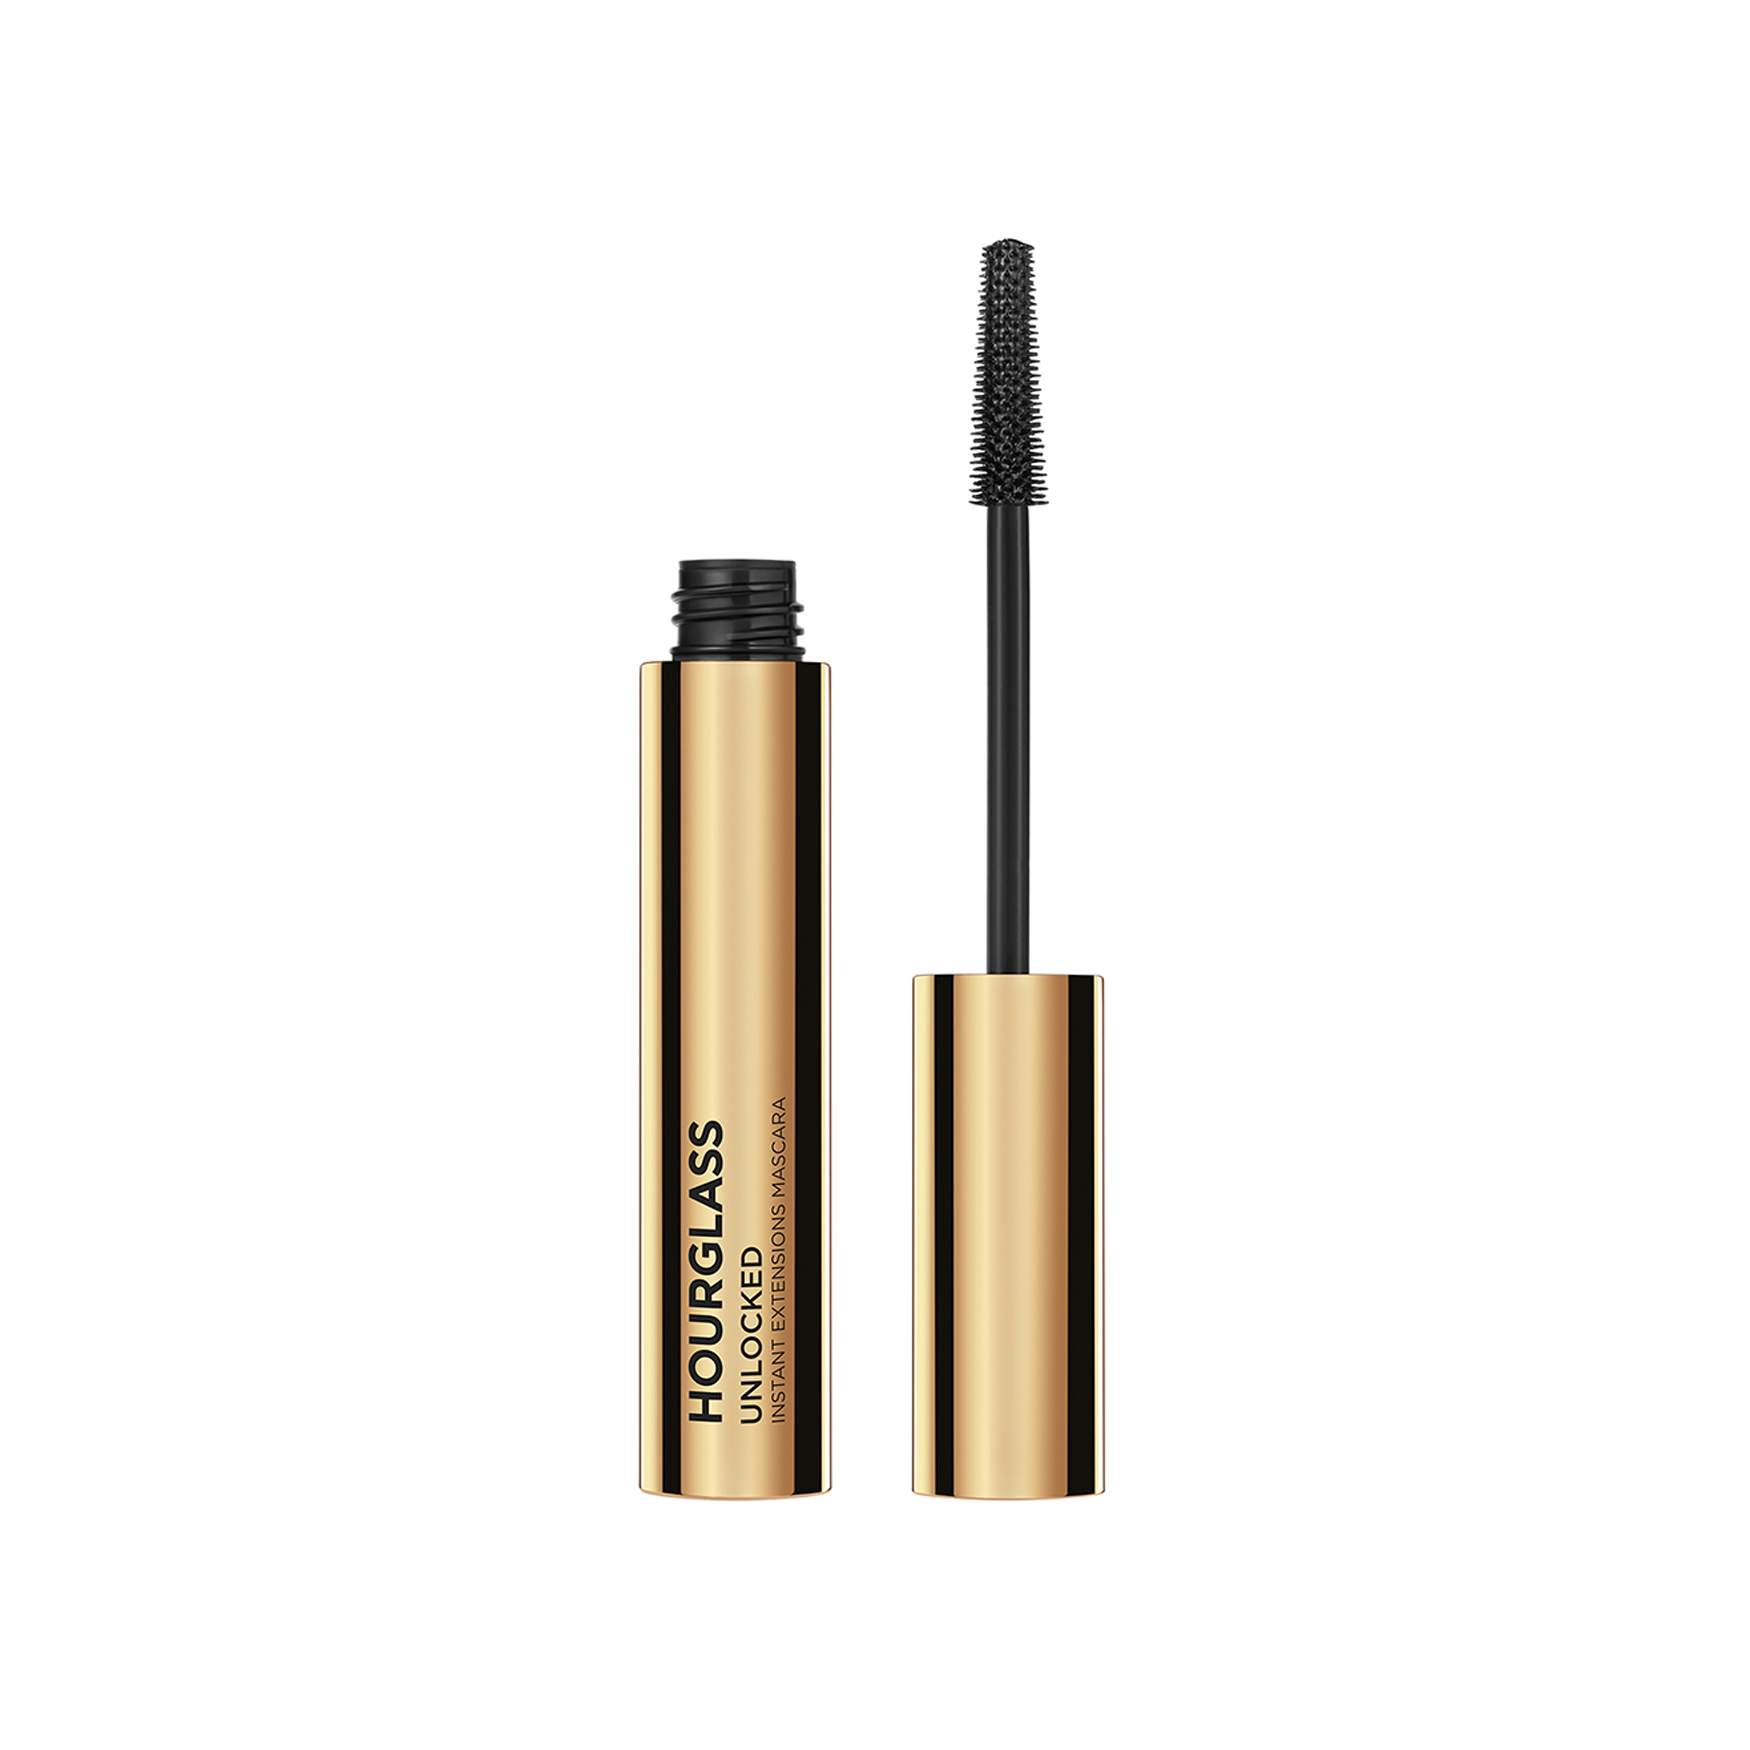 Hourglass Unlocked Instant Extensions Mascara | Space NK